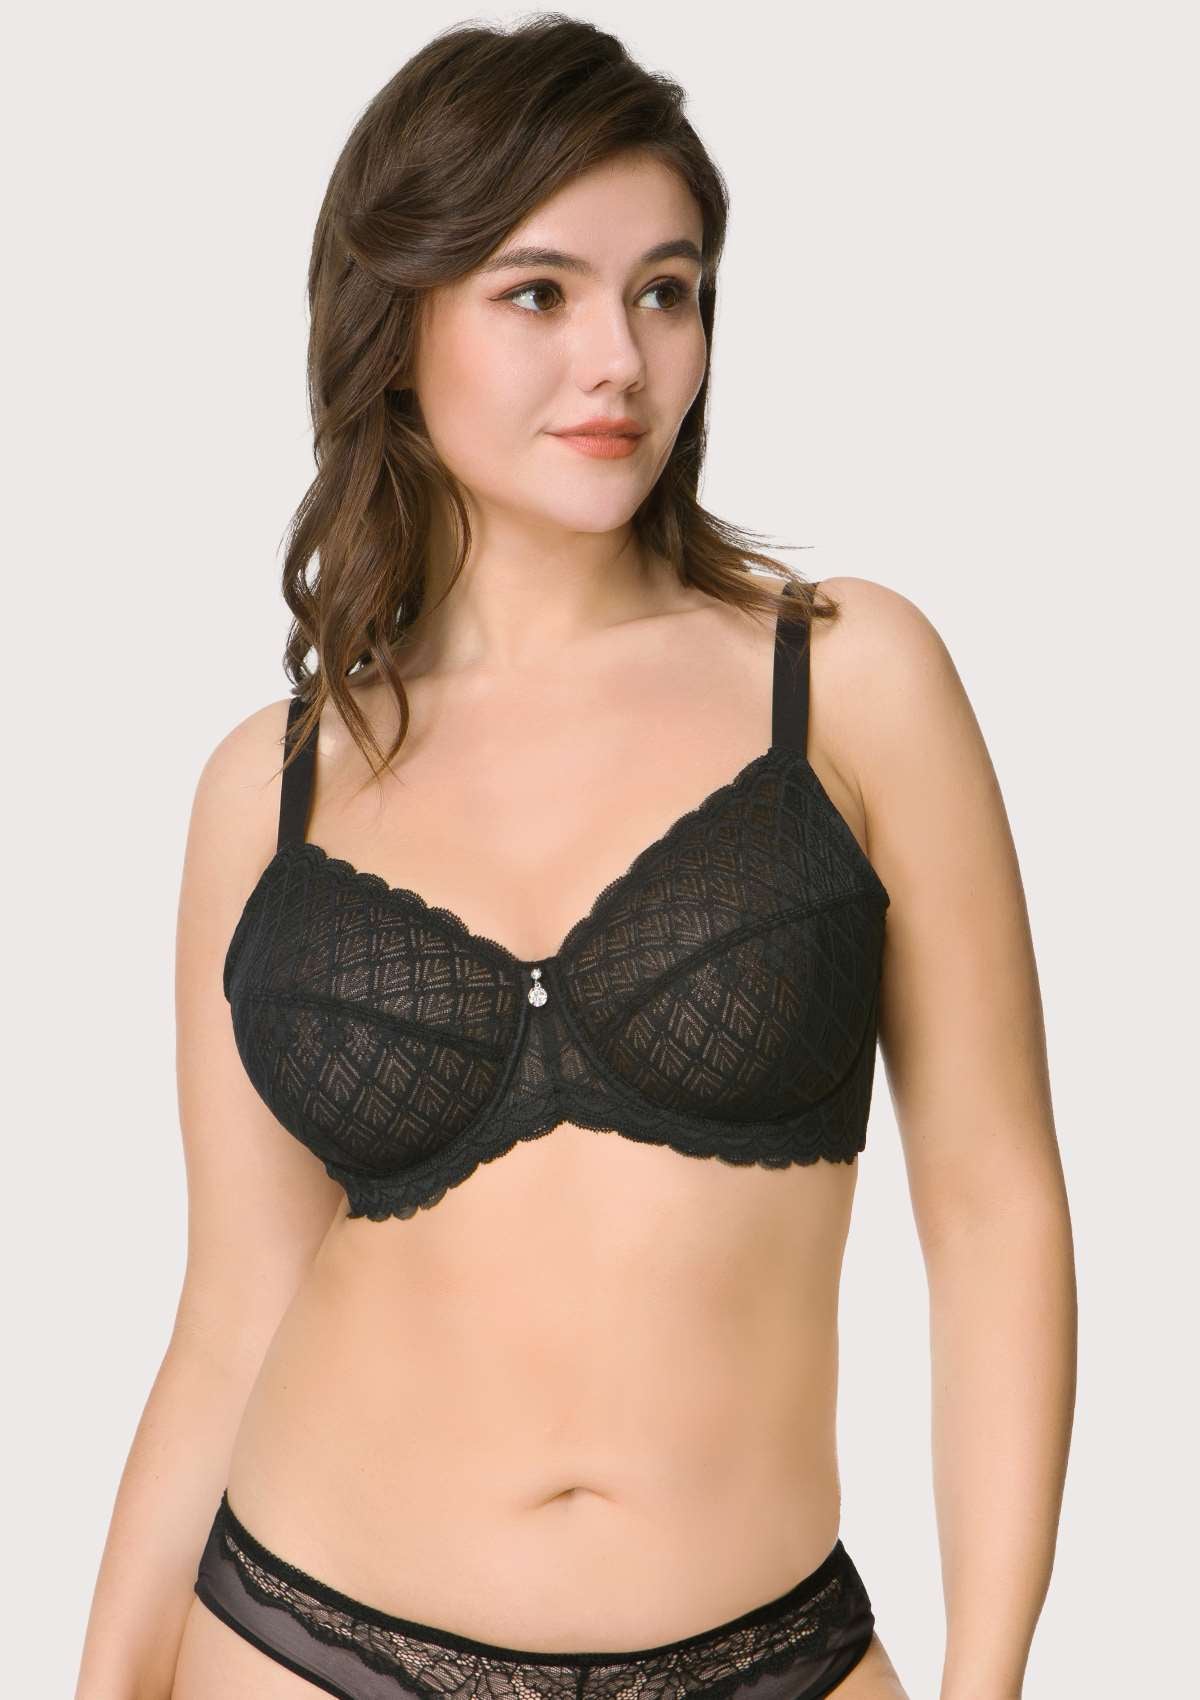 HSIA Plaid Full-Coverage Bra: Soft Bra With Thick Straps - Coral / 36 / D